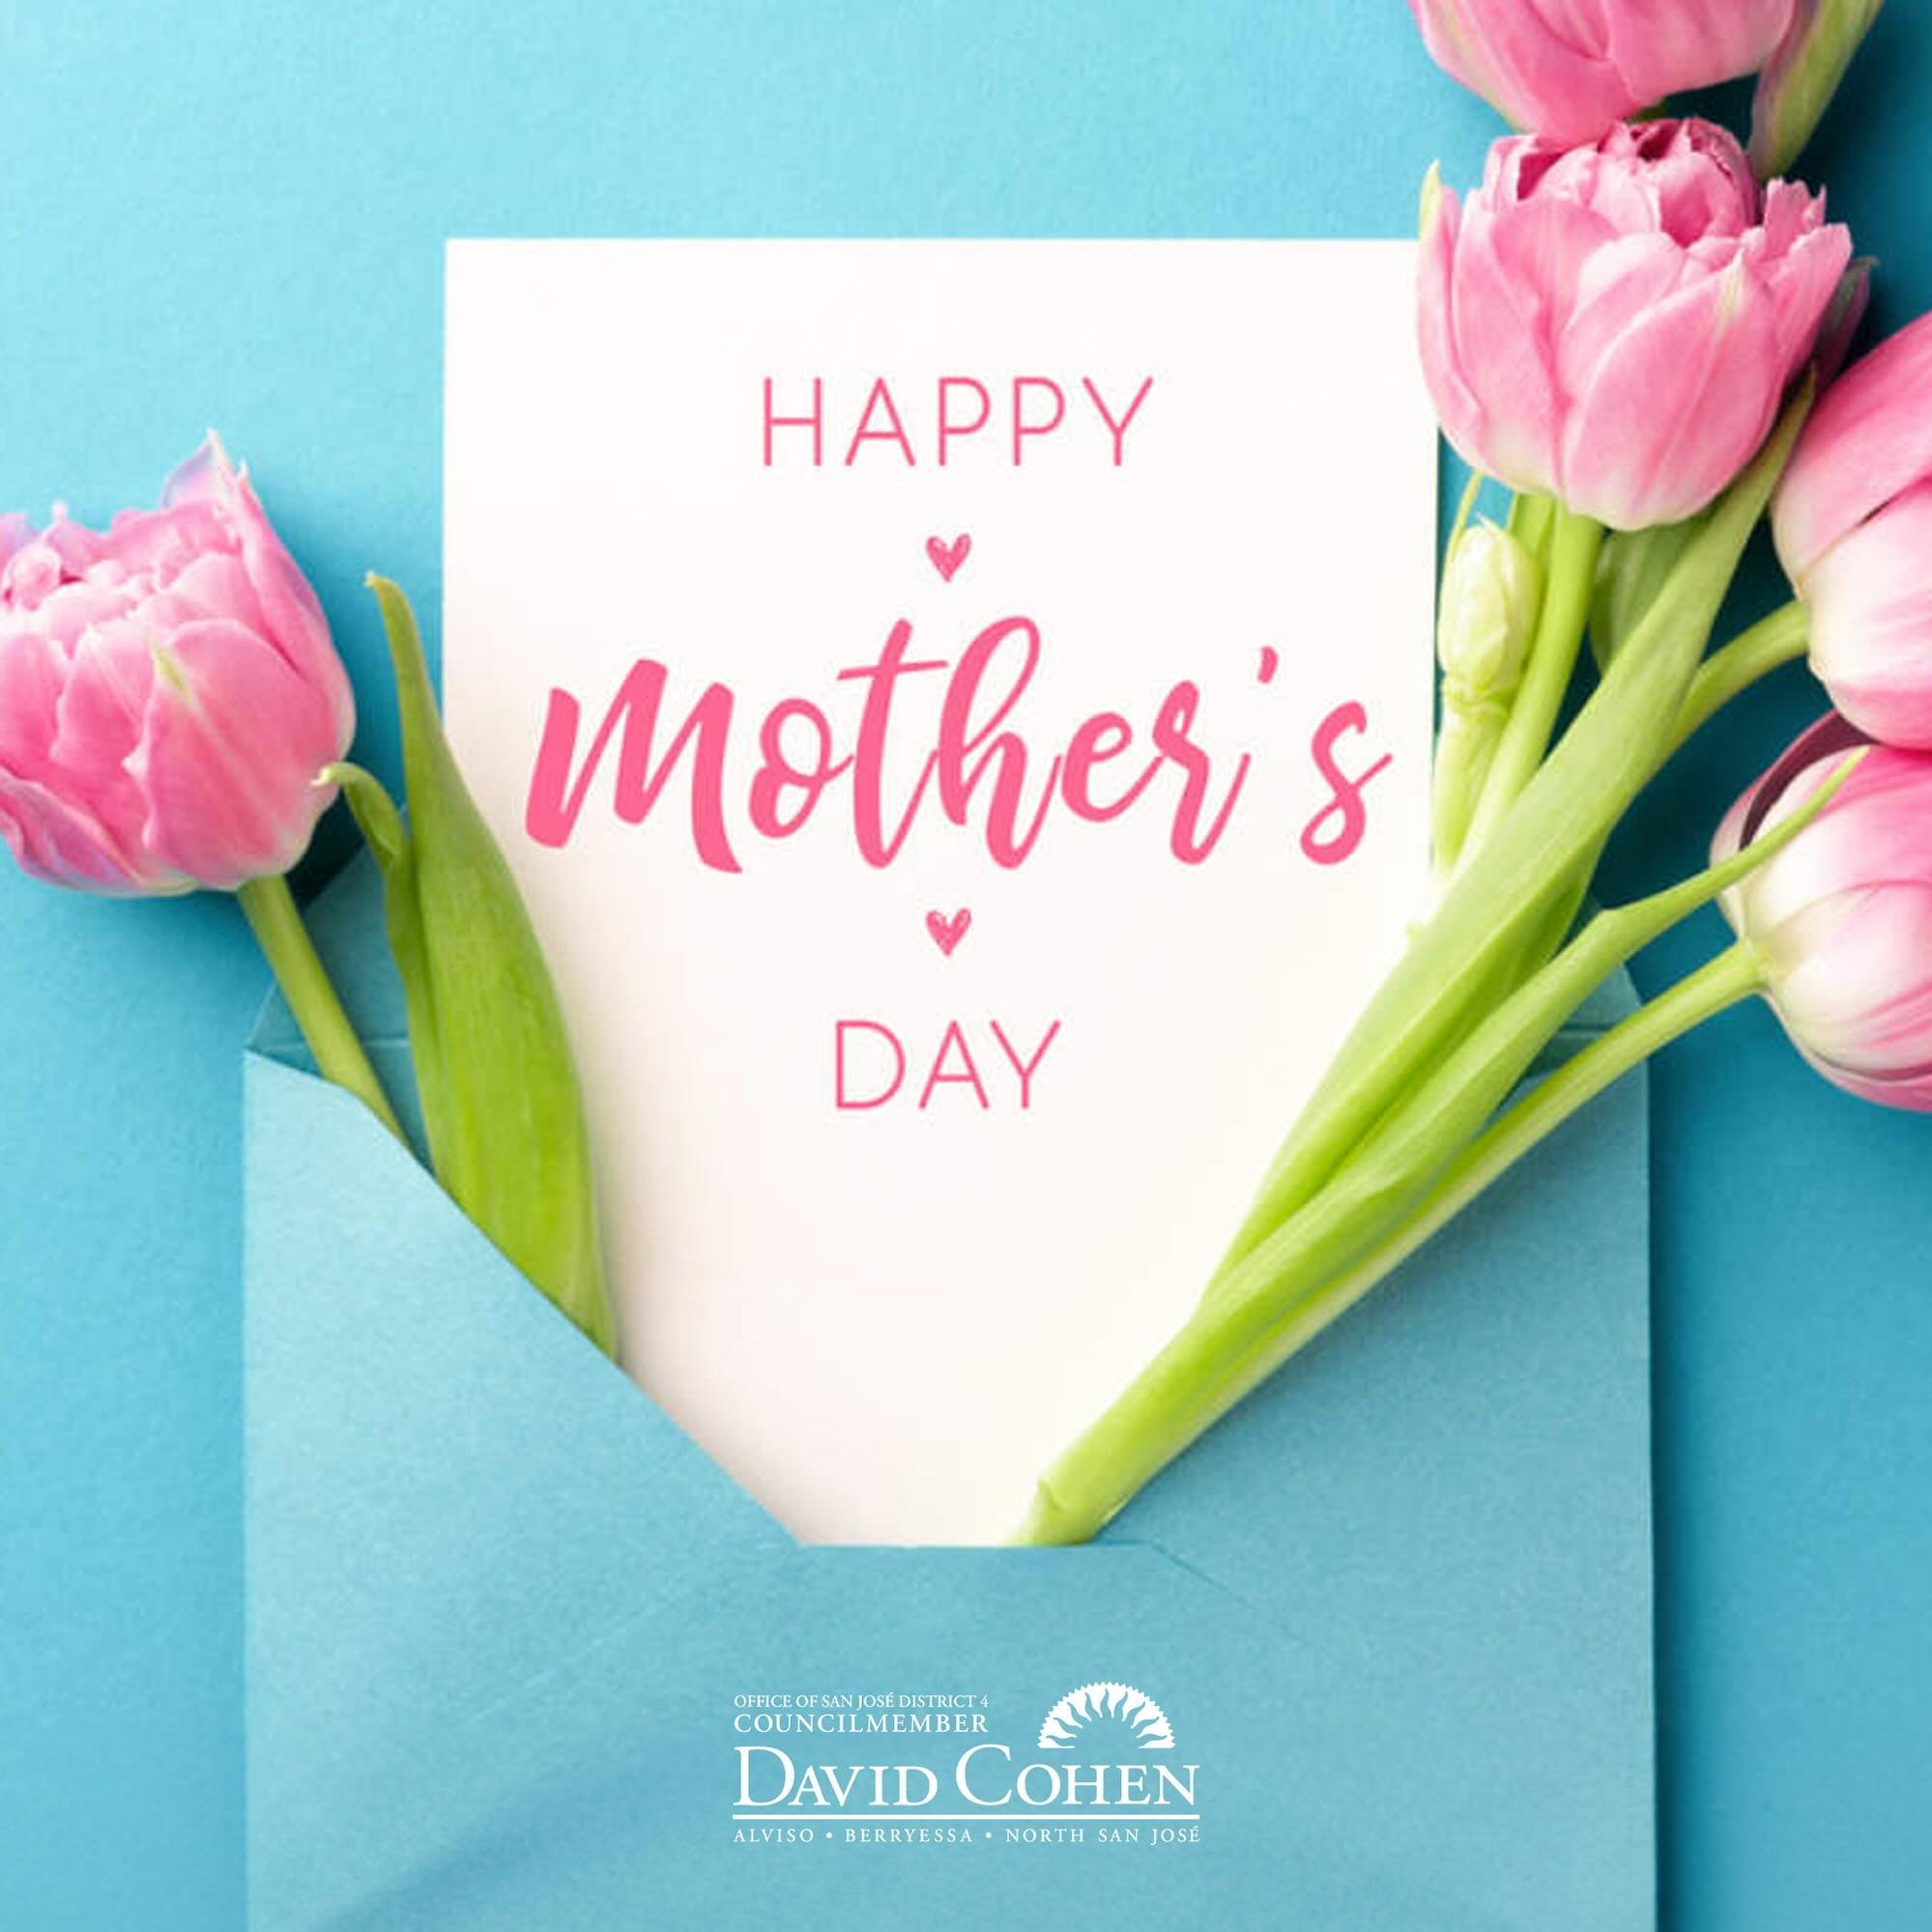 Today, we celebrate and honor all the incredible moms who make a difference in our lives and communities. Your strength, love, and dedication inspire us every day. Thank you for all that you do. Happy Mother&rsquo;s Day!